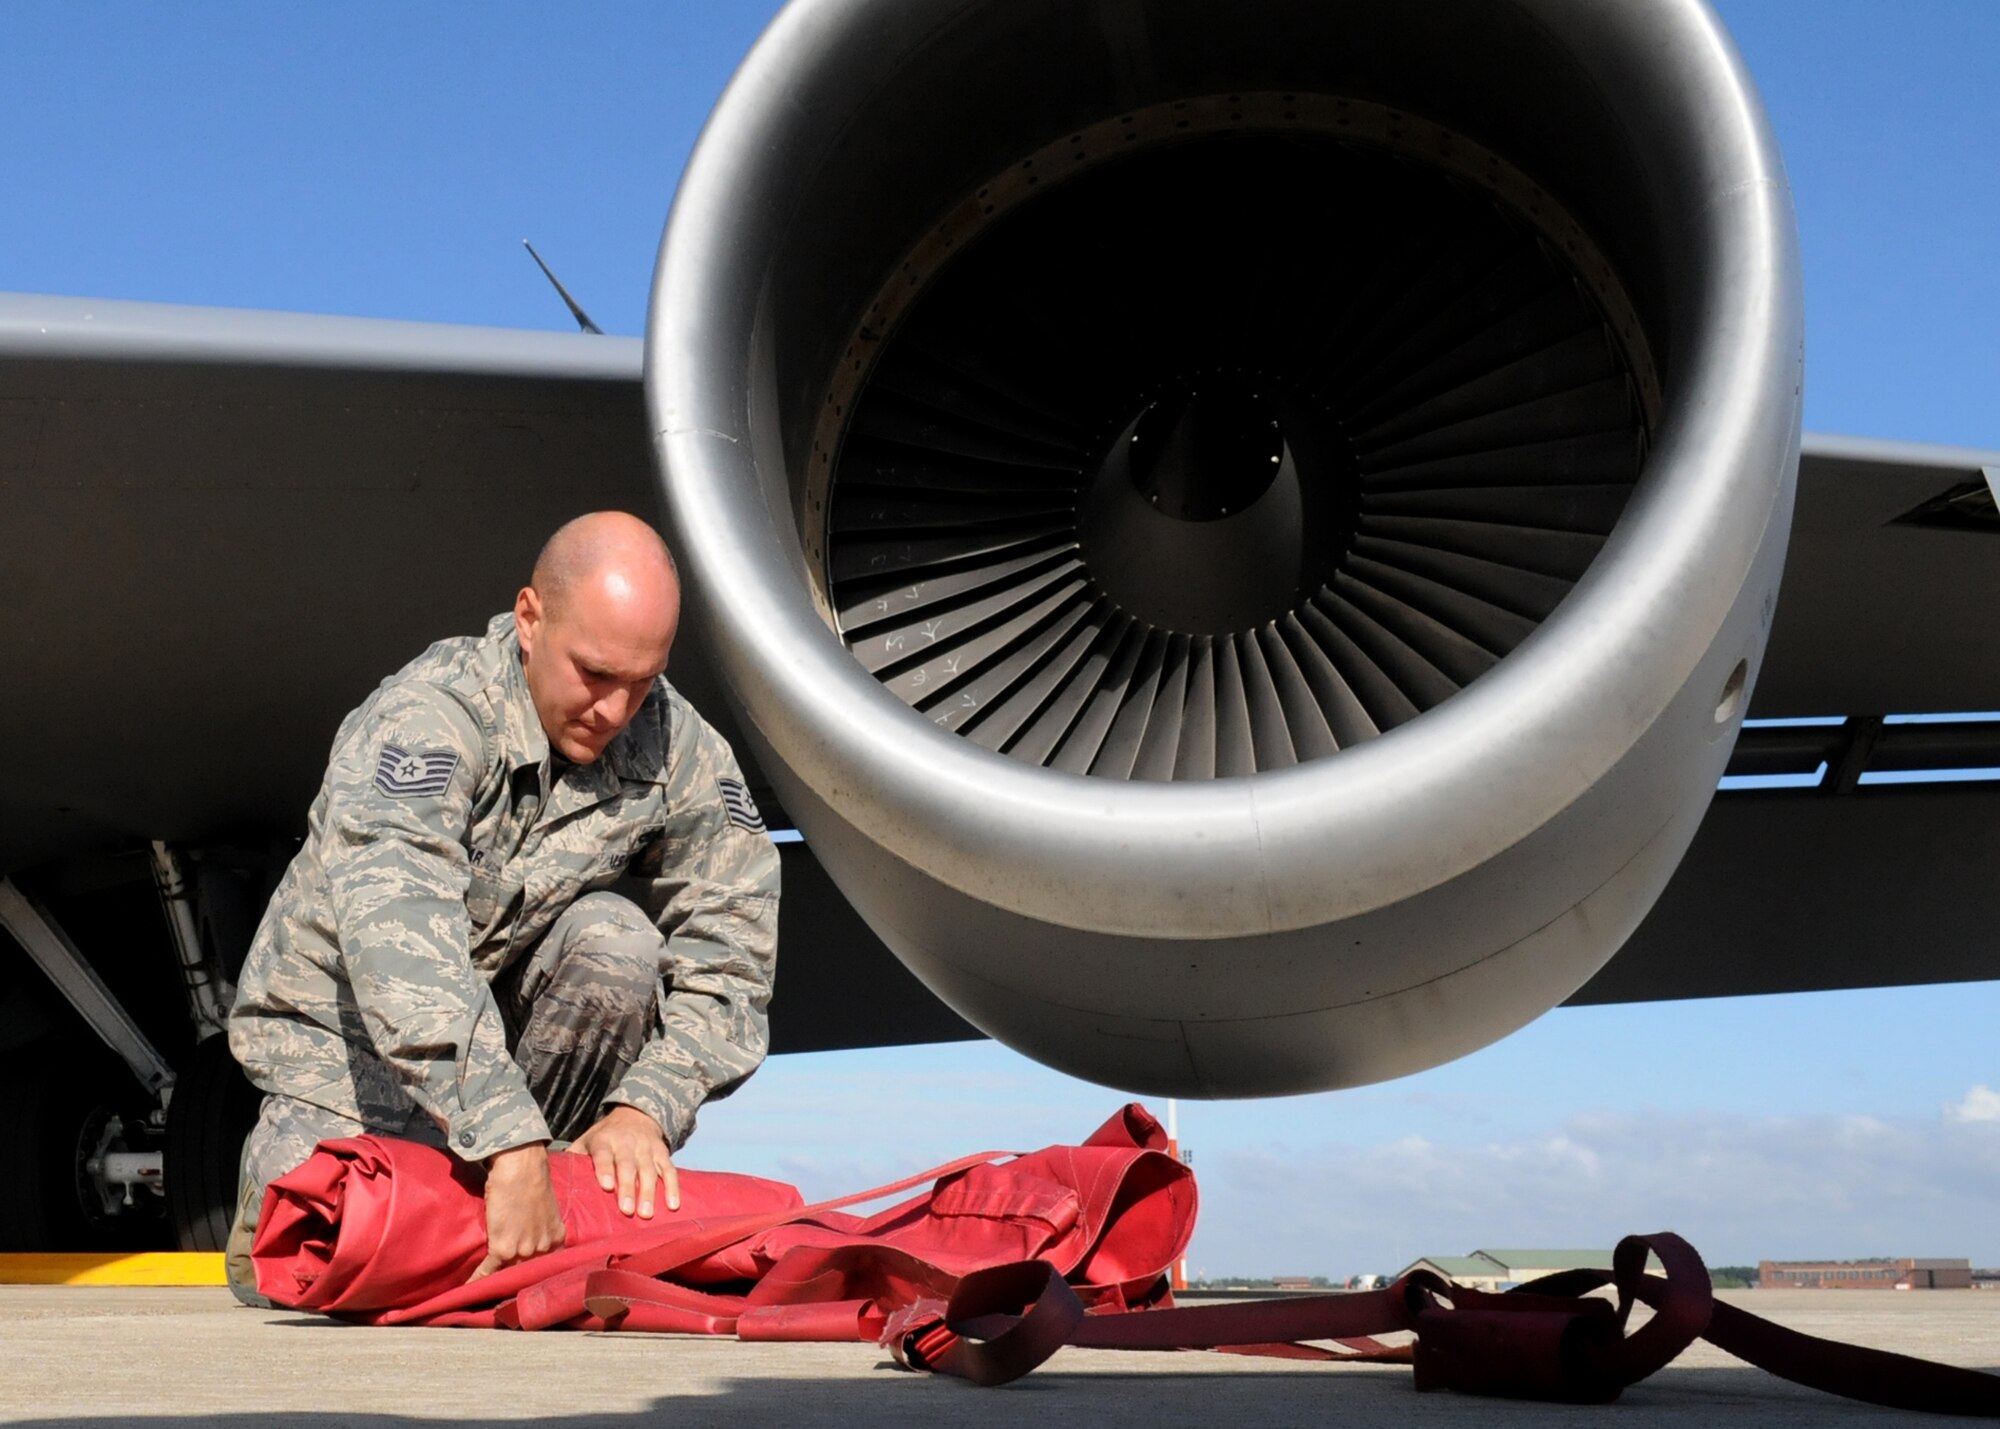 RAF MILDENHALL, England – Tech. Sgt. Adam Hagar, 100th Aircraft Maintenance Squadron crew chief, rolls up intake covers of a KC-135 engine during prelaunch preparations in support of Allied Strike Aug. 5. Allied Strike is Europe’s premier annual close air support exercise that helps build partnership capacity among allied NATO nations and joint services. (U.S. Air Force photo/ Staff Sgt. Jerry Fleshman)